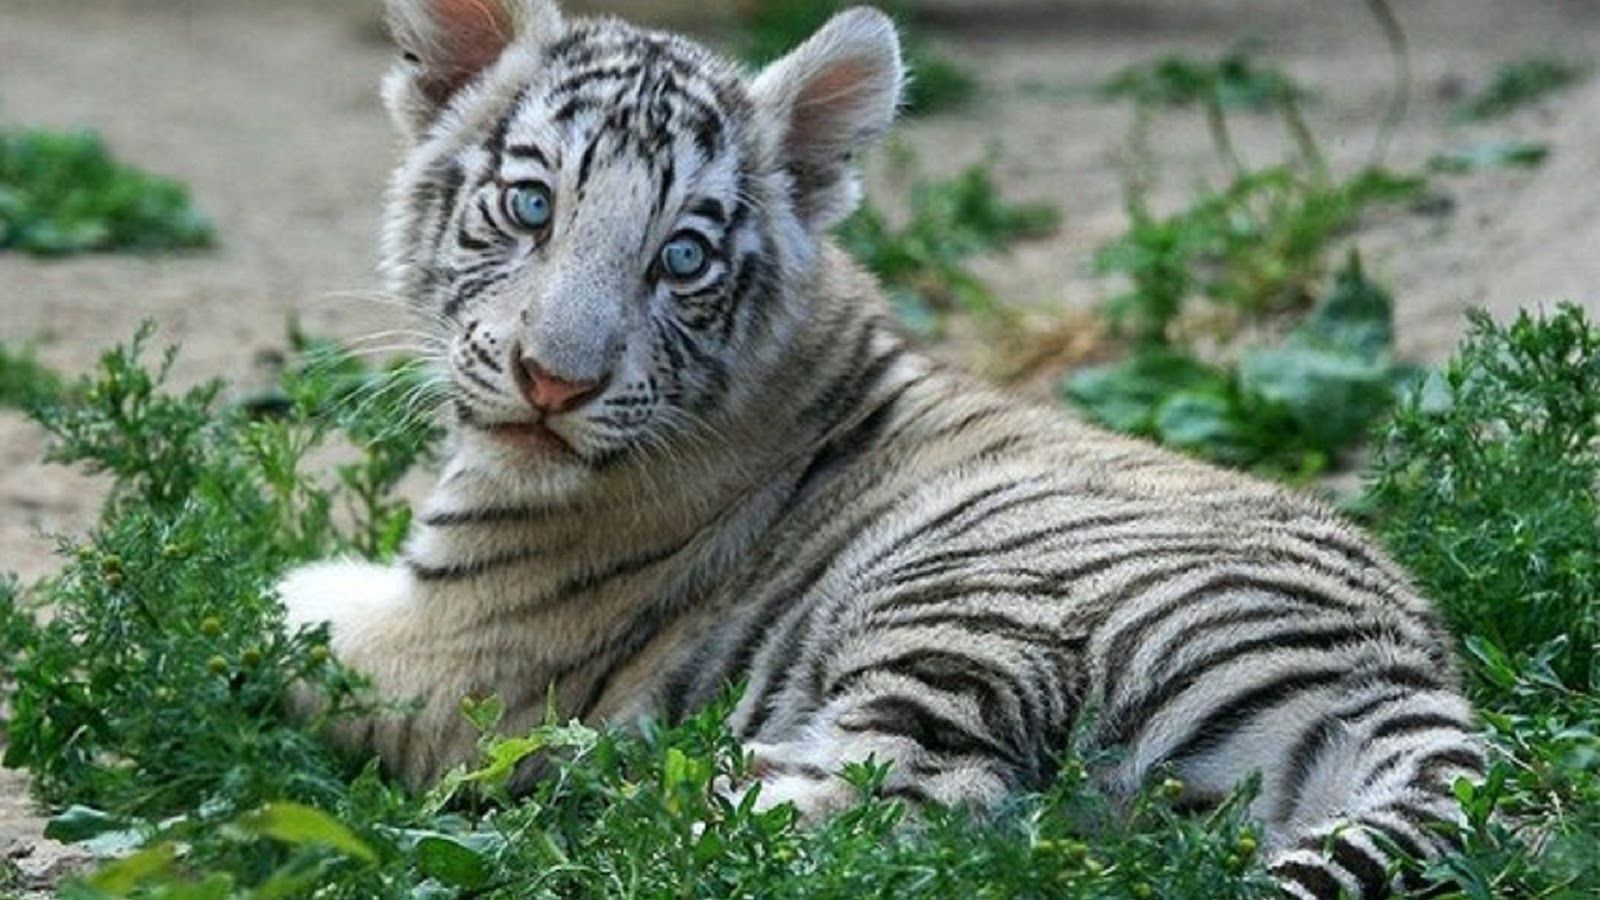 White Tiger Cubs Wallpapers Image Photos Pictures Backgrounds.